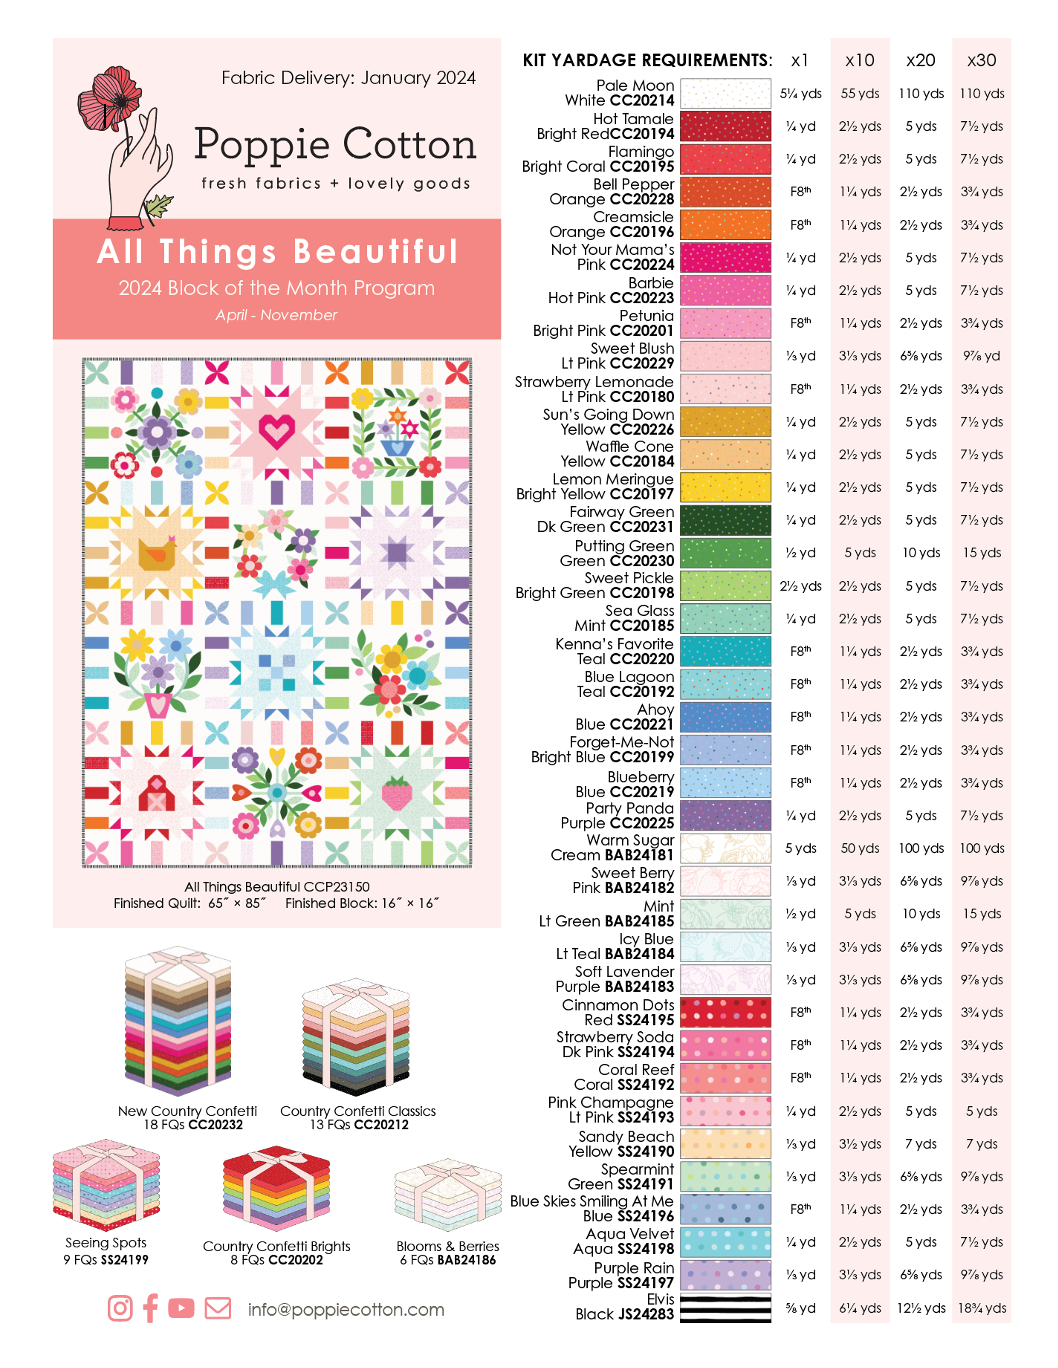 All Things Beautiful Kit Yardage Requirements Page - Free Download